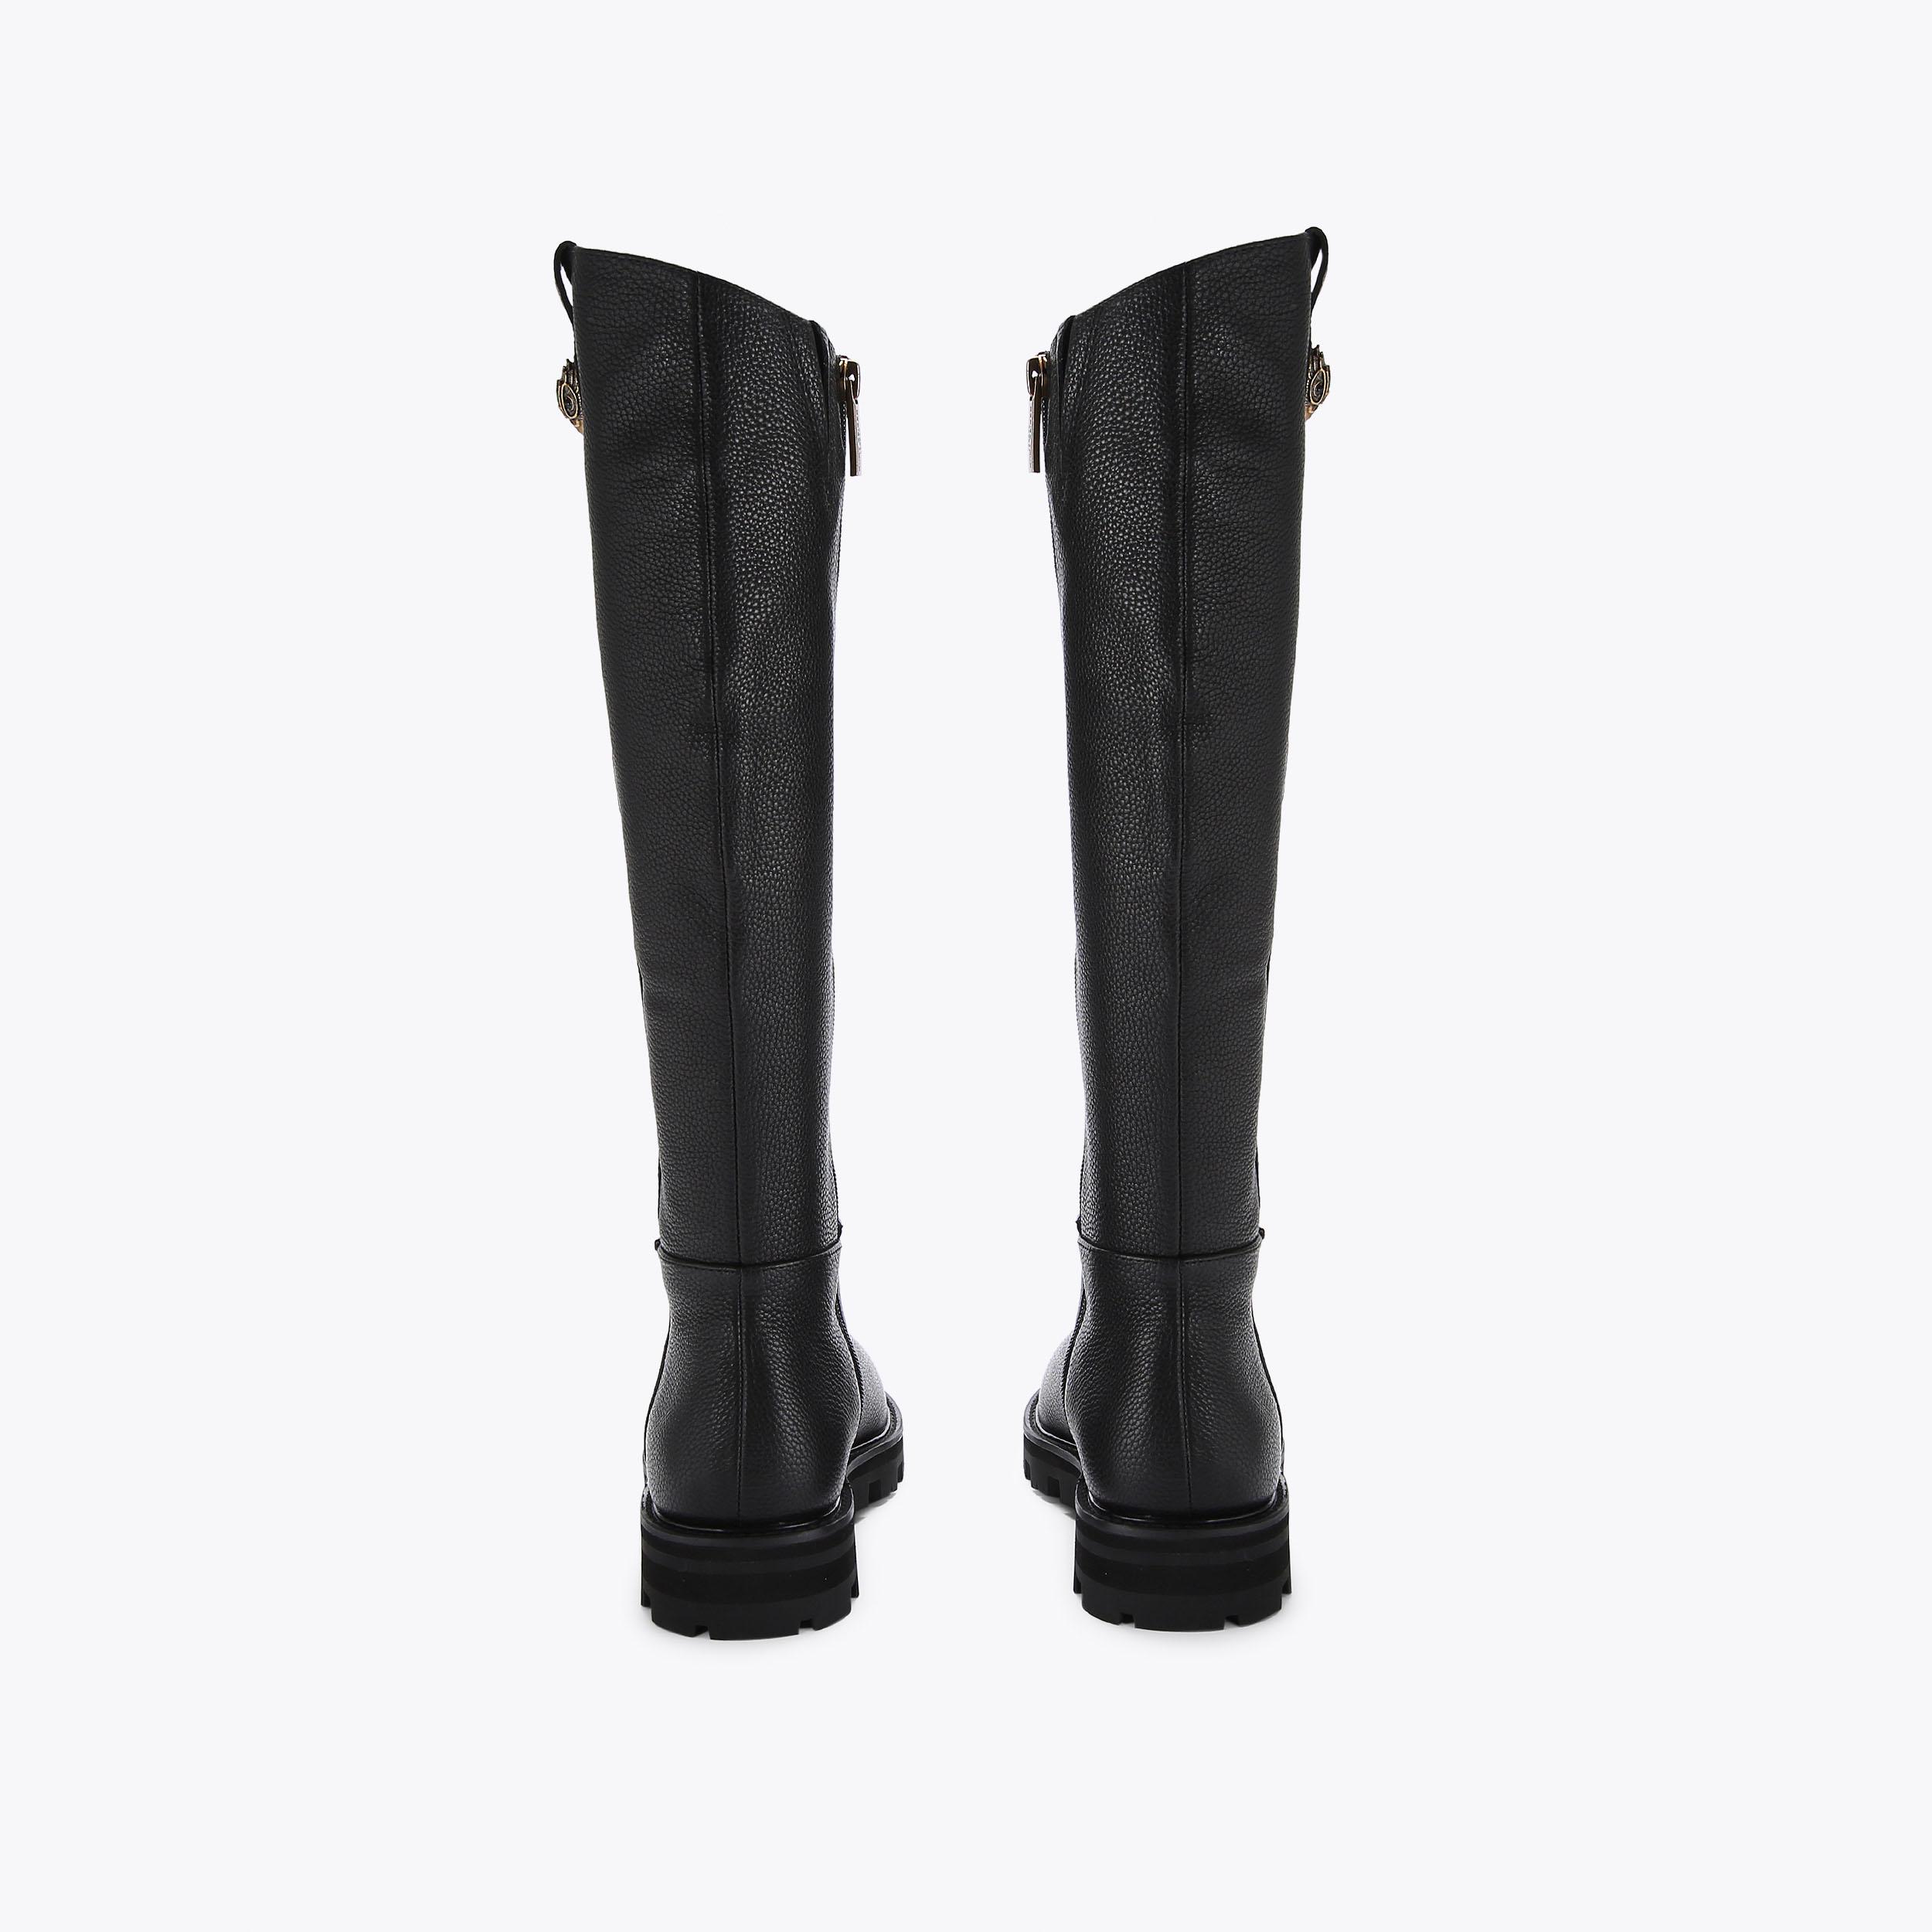 CARNABY RIDING BOOT Black Leather Boot by KURT GEIGER LONDON